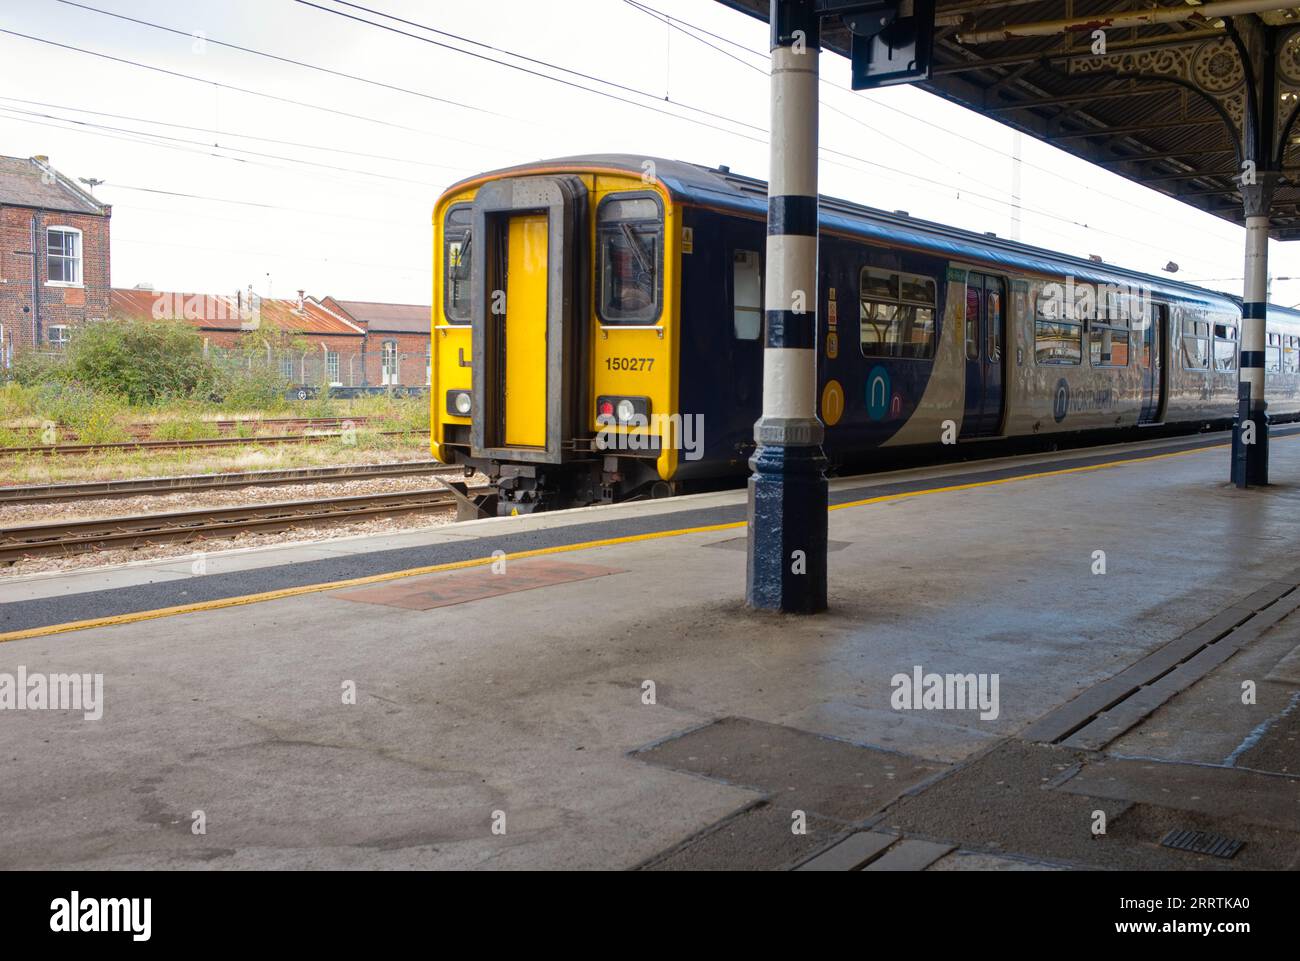 Northern trains passenger train number 150277 at Doncaster station Stock Photo